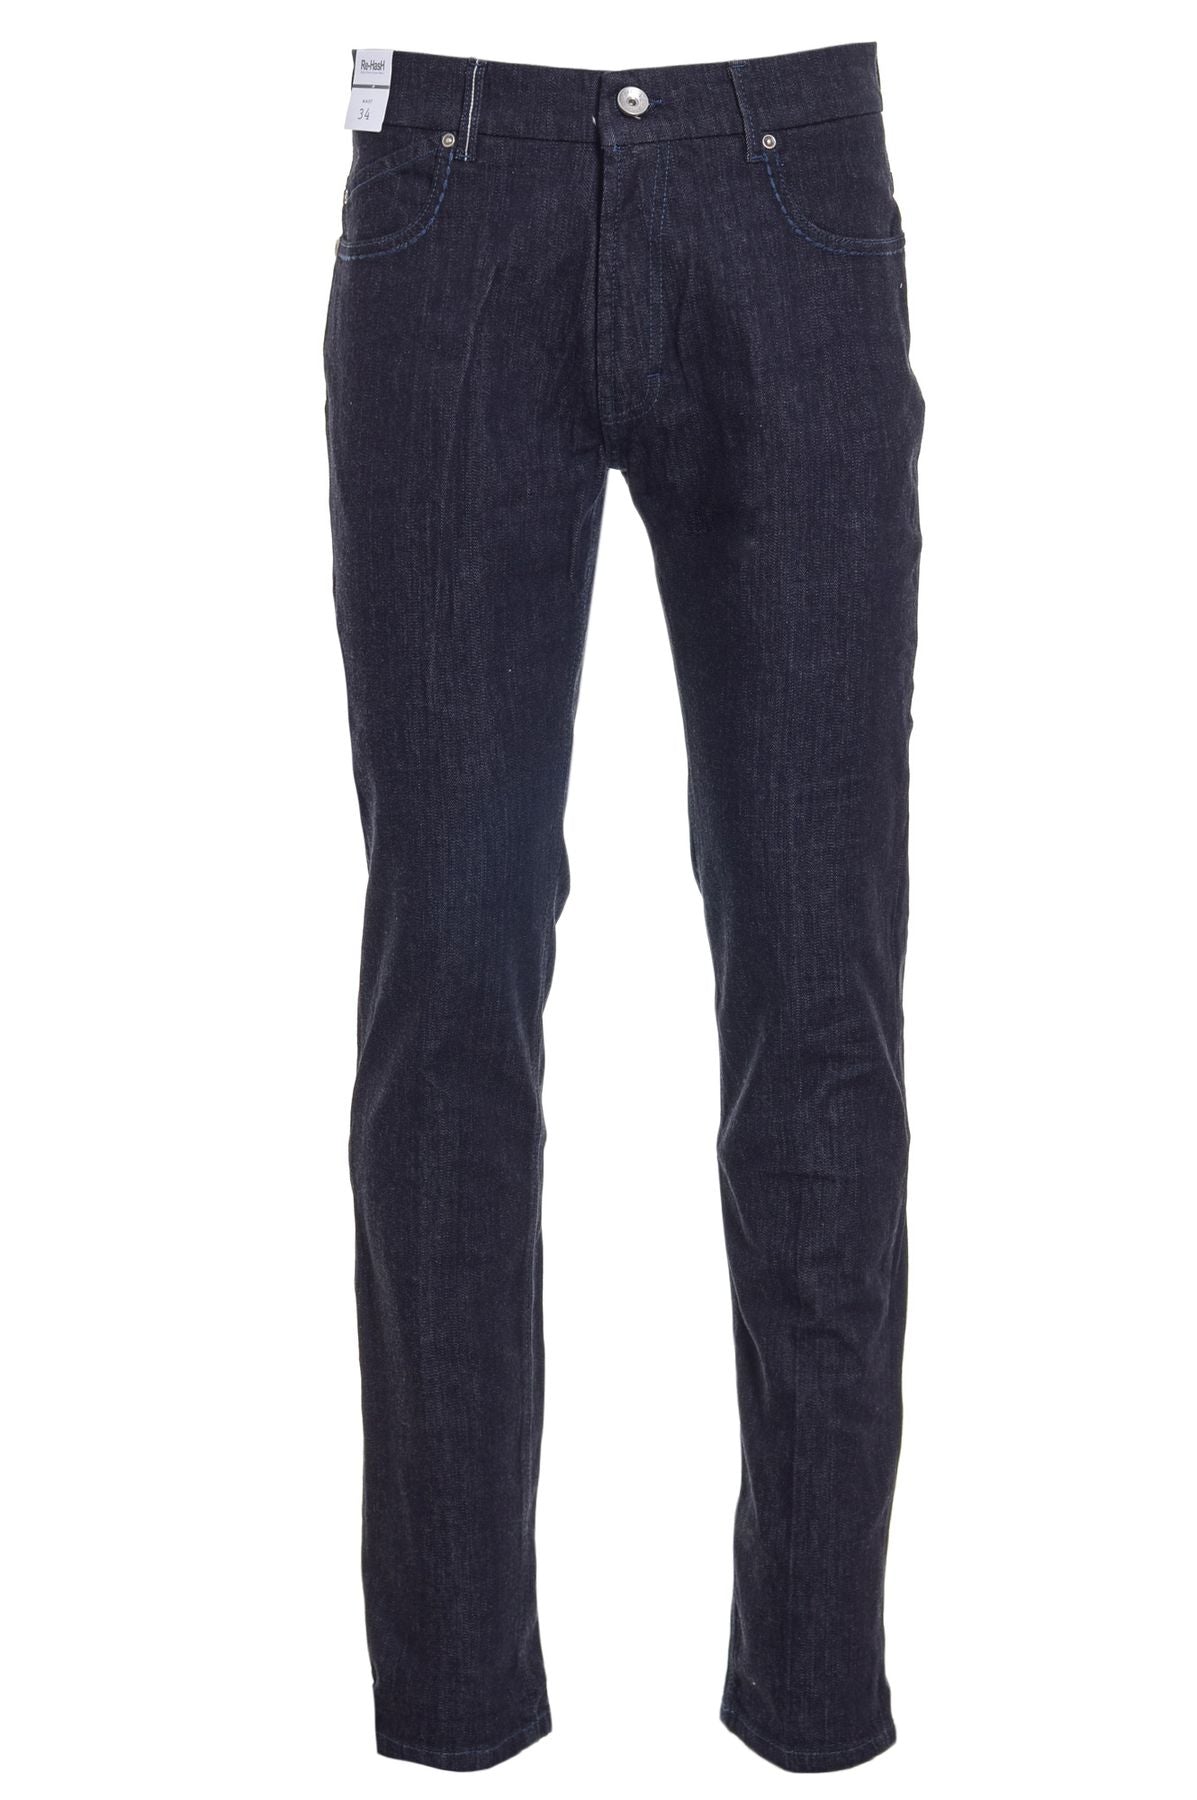 Re-HasH Jeans Autunno/Inverno pl4002754hopper